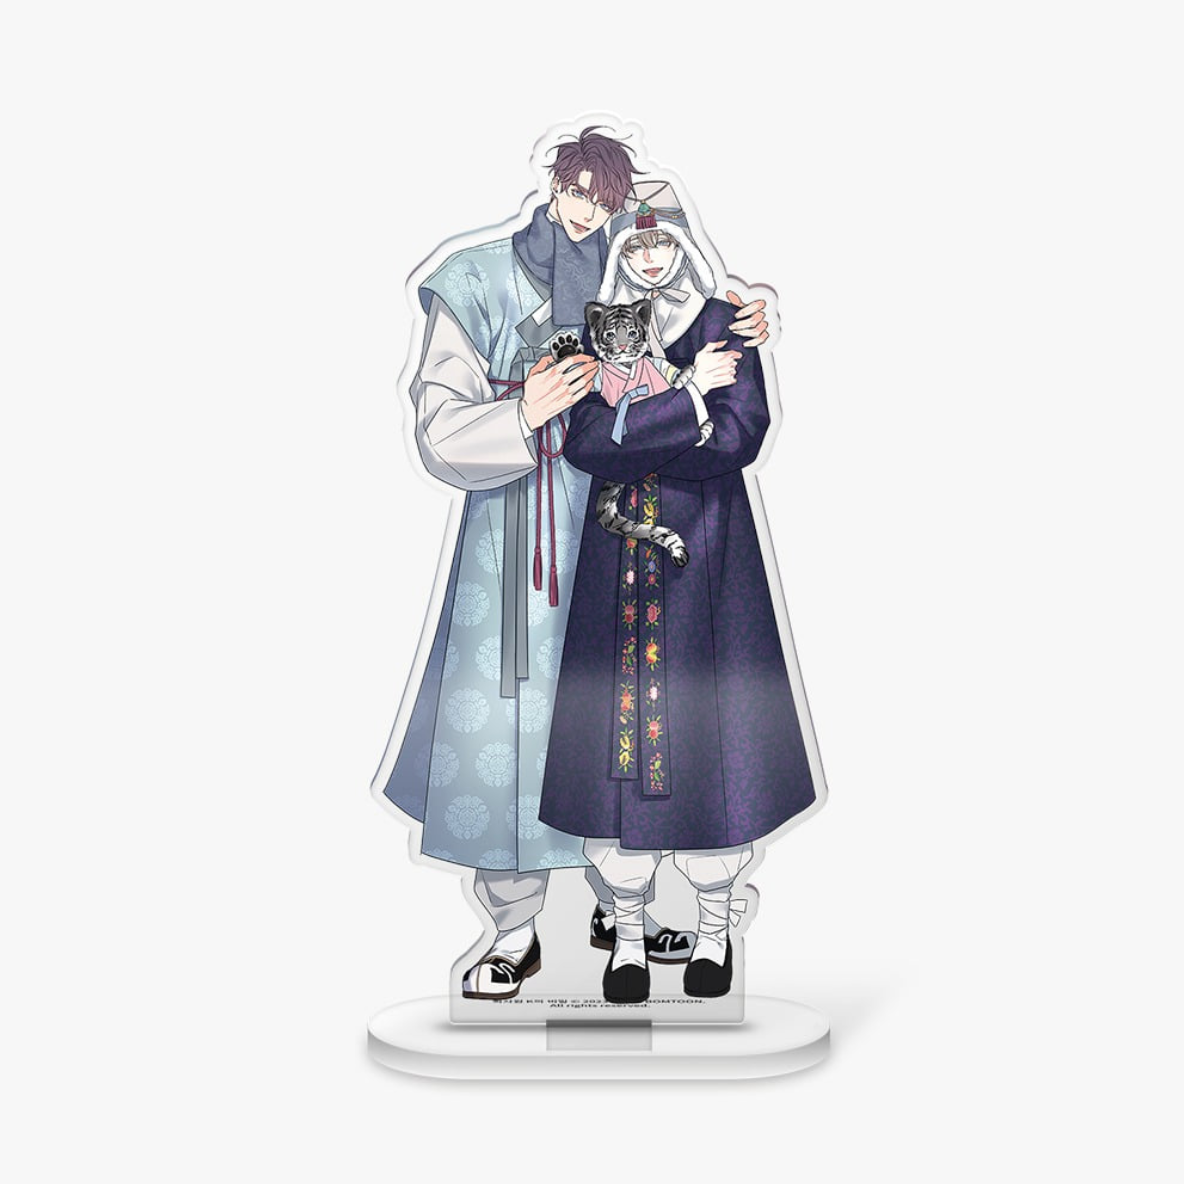 [BOMTOON PLUS] The Unquenchable Mr. Kim - Gangwoo + Doyoon : Acrylic Stand